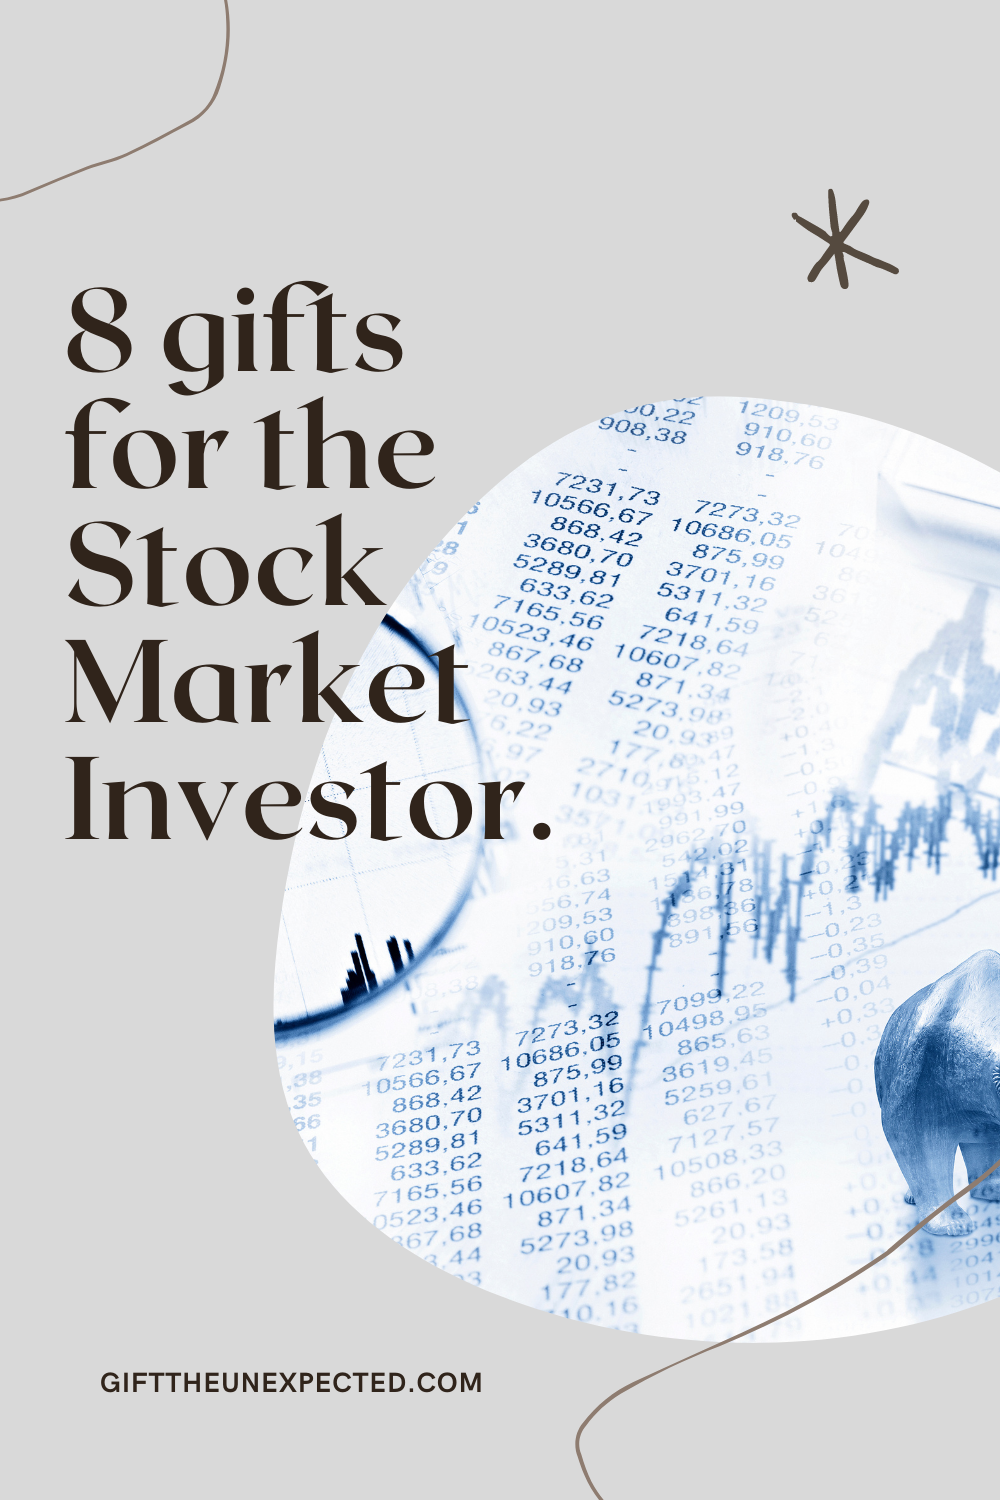 8 gifts for the stock market investor